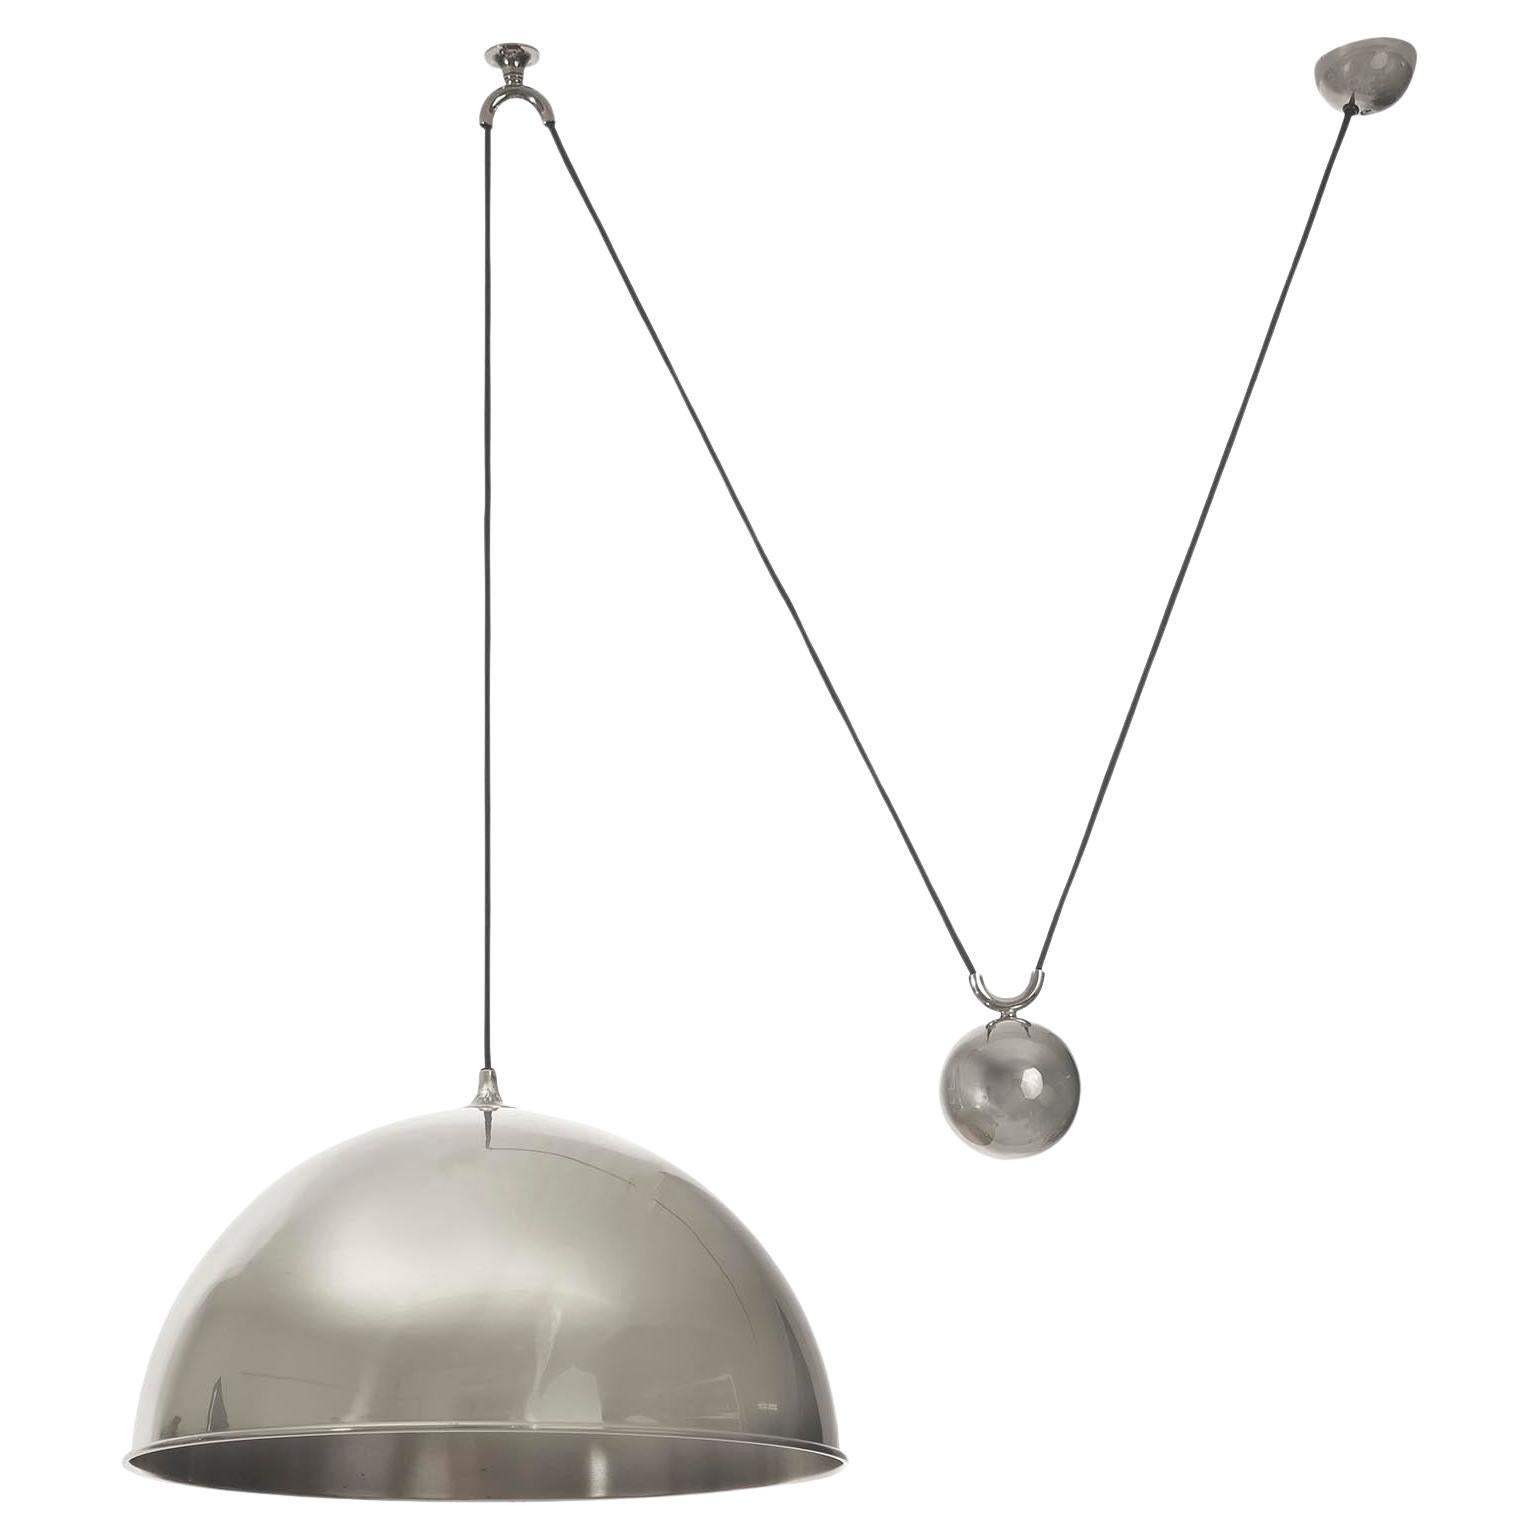 Florian Schulz Pendant Light Counterweight Counterbalance Patinated Nickel, 1970 For Sale